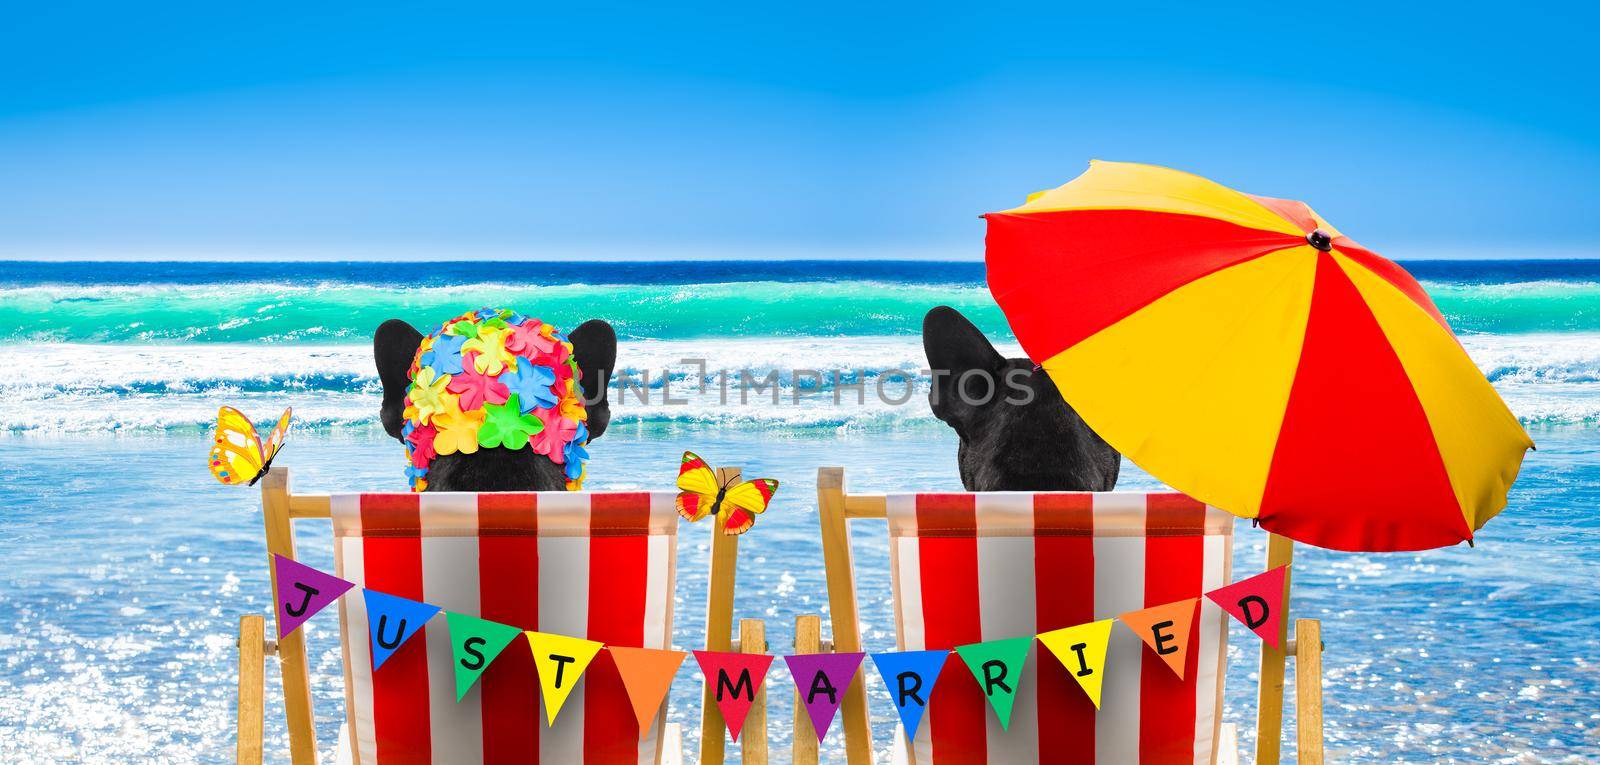 dog resting and relaxing on a hammock or beach chair under umbrella at the beach ocean shore, on summer vacation holidays, just married